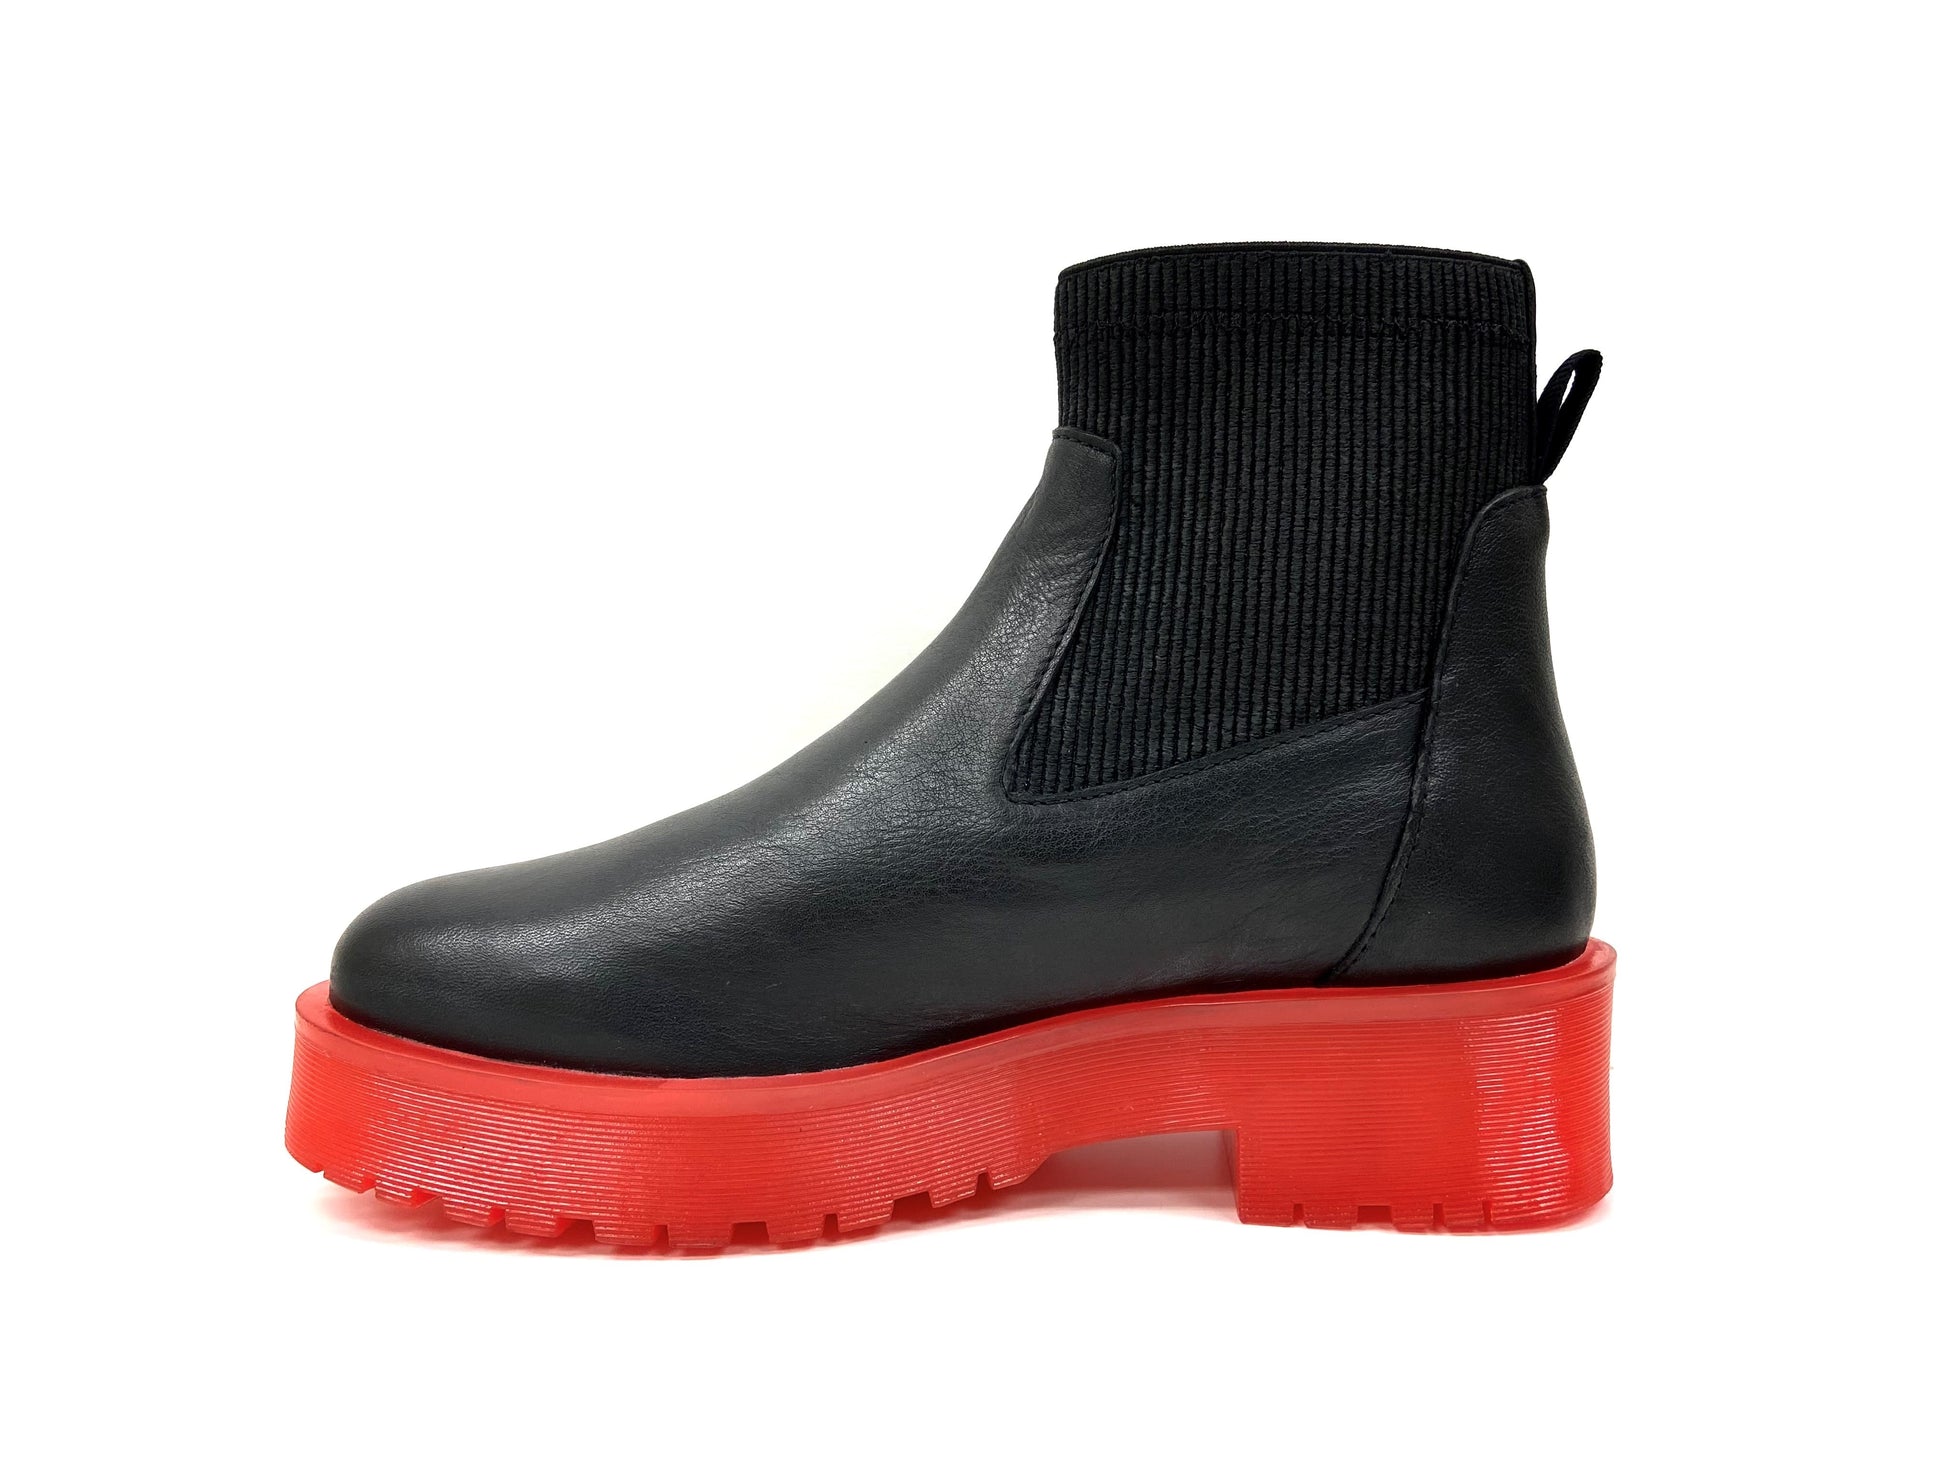 Red Bottom Sole Chelsea Ankle Boot – oobash